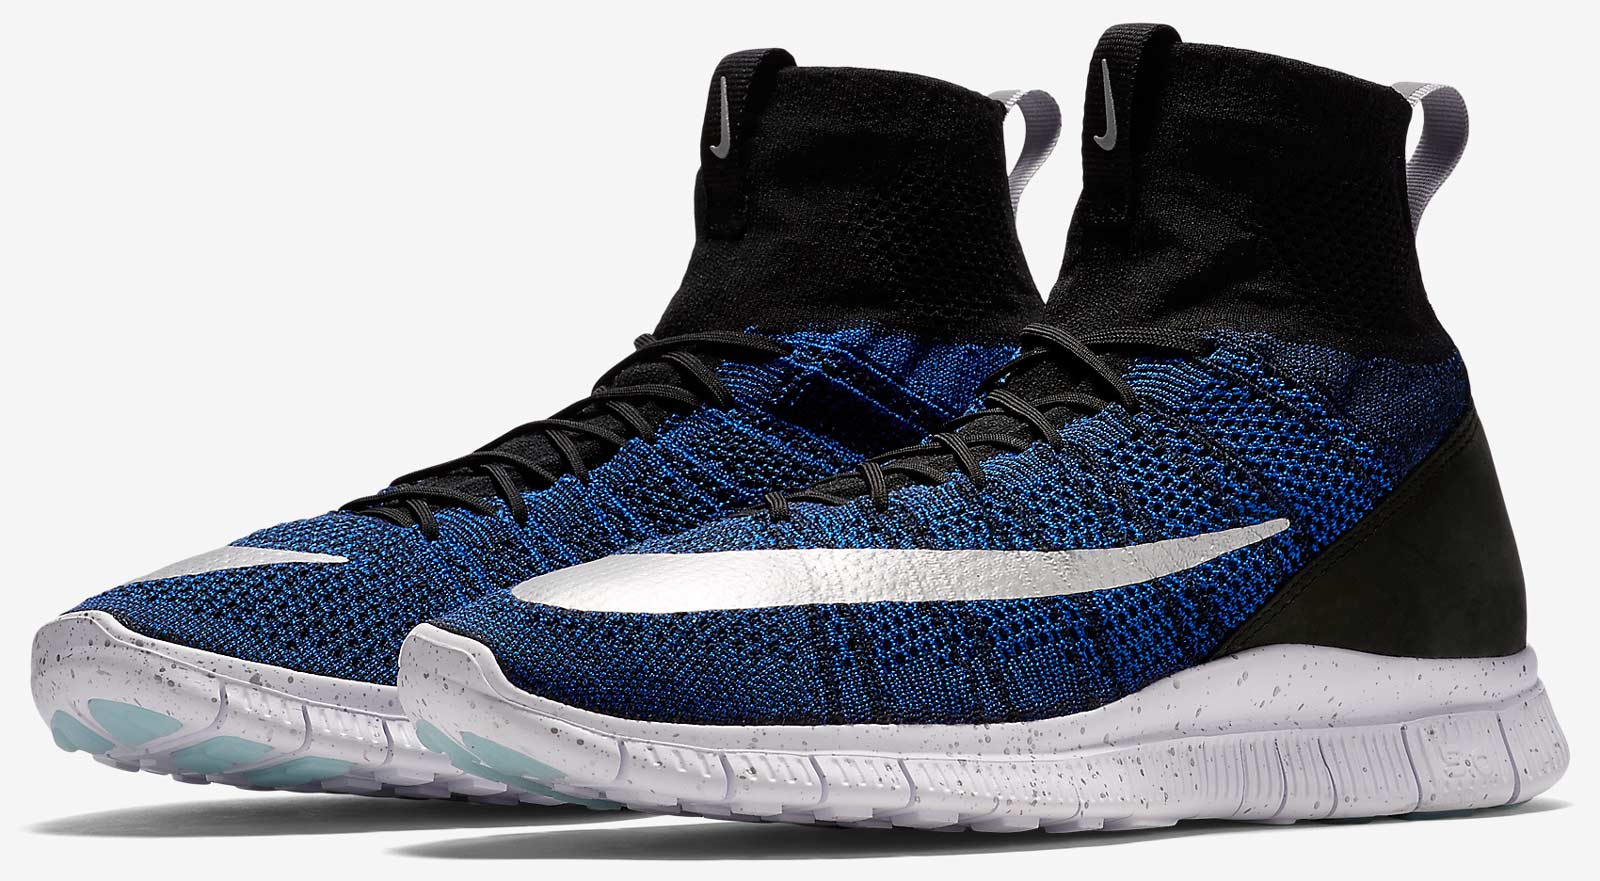 Nike Free Mercurial Superfly 2016 Cristiano Ronaldo Shoes Released